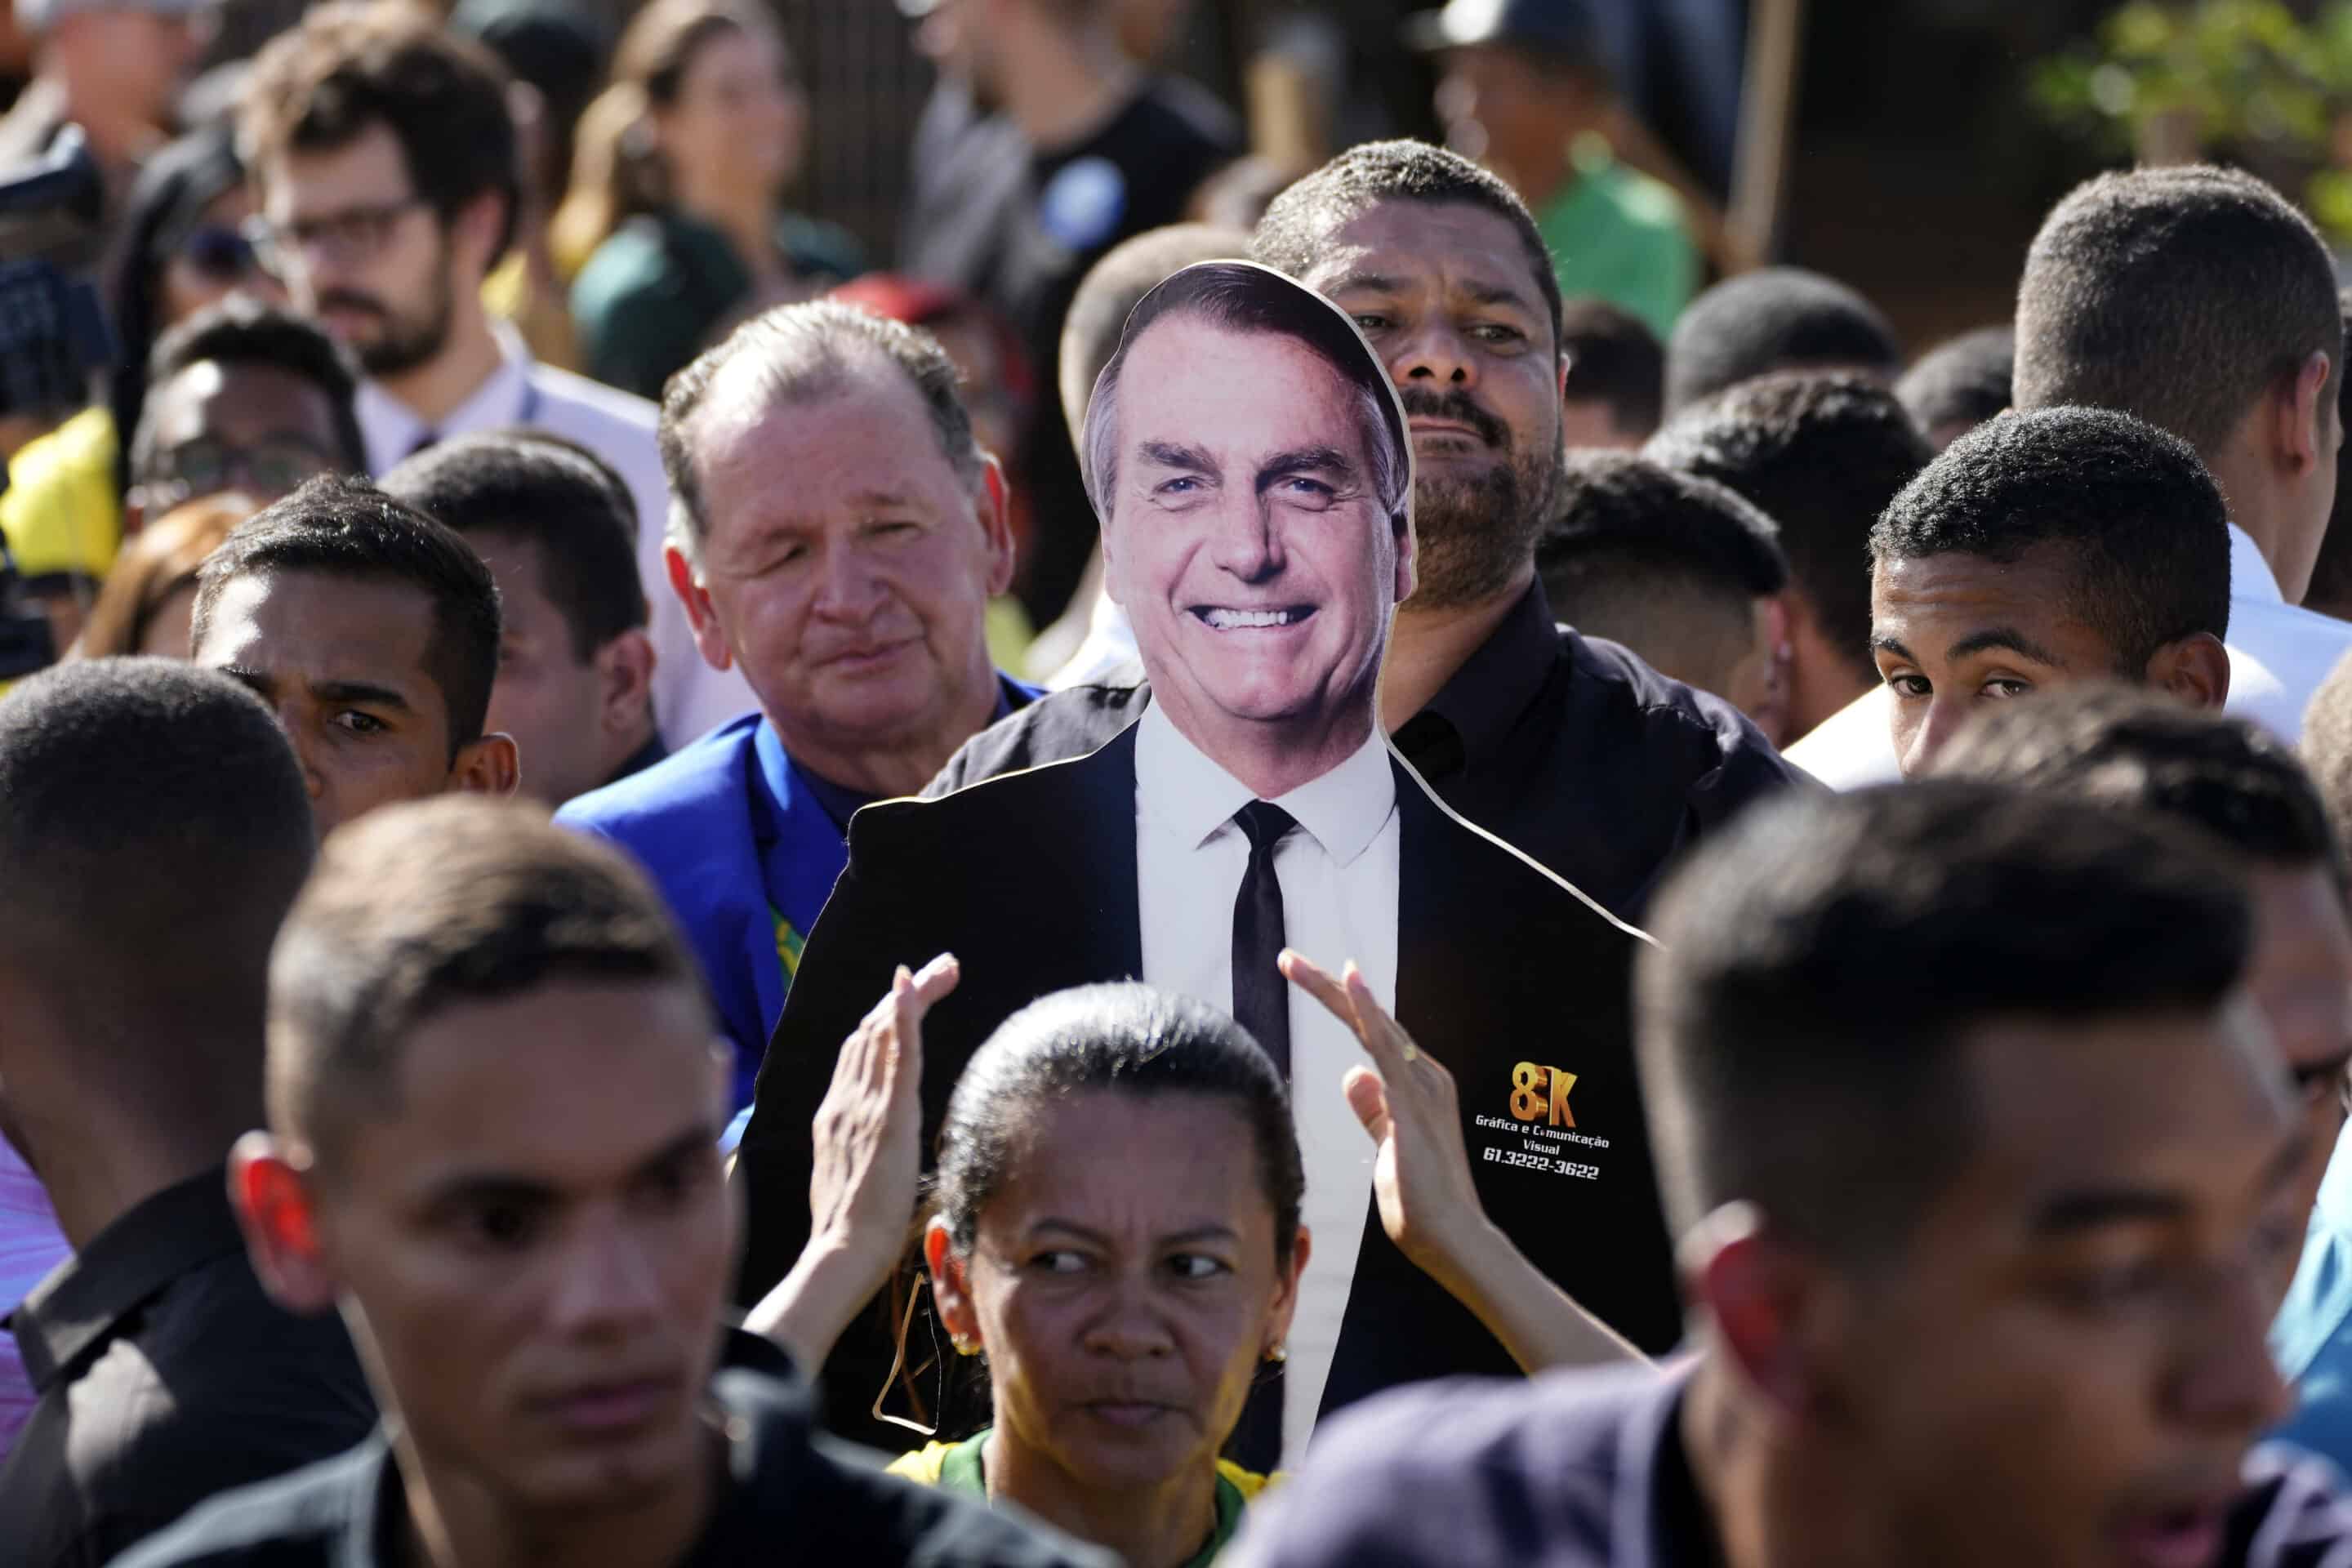 Supporters carry a life-size image of Brazil's President Jair Bolsonaro during a campaign rally in the rural workers' settlement Nova Jerusalem, or New Jerusalem, in Brasilia, Brazil, Monday, Oct. 24, 2022. Bolsonaro is running for reelection in the presidential runoff election set for Oct. 30. (AP Photo/Eraldo Peres)/XEP115/22297755282079//2210242306